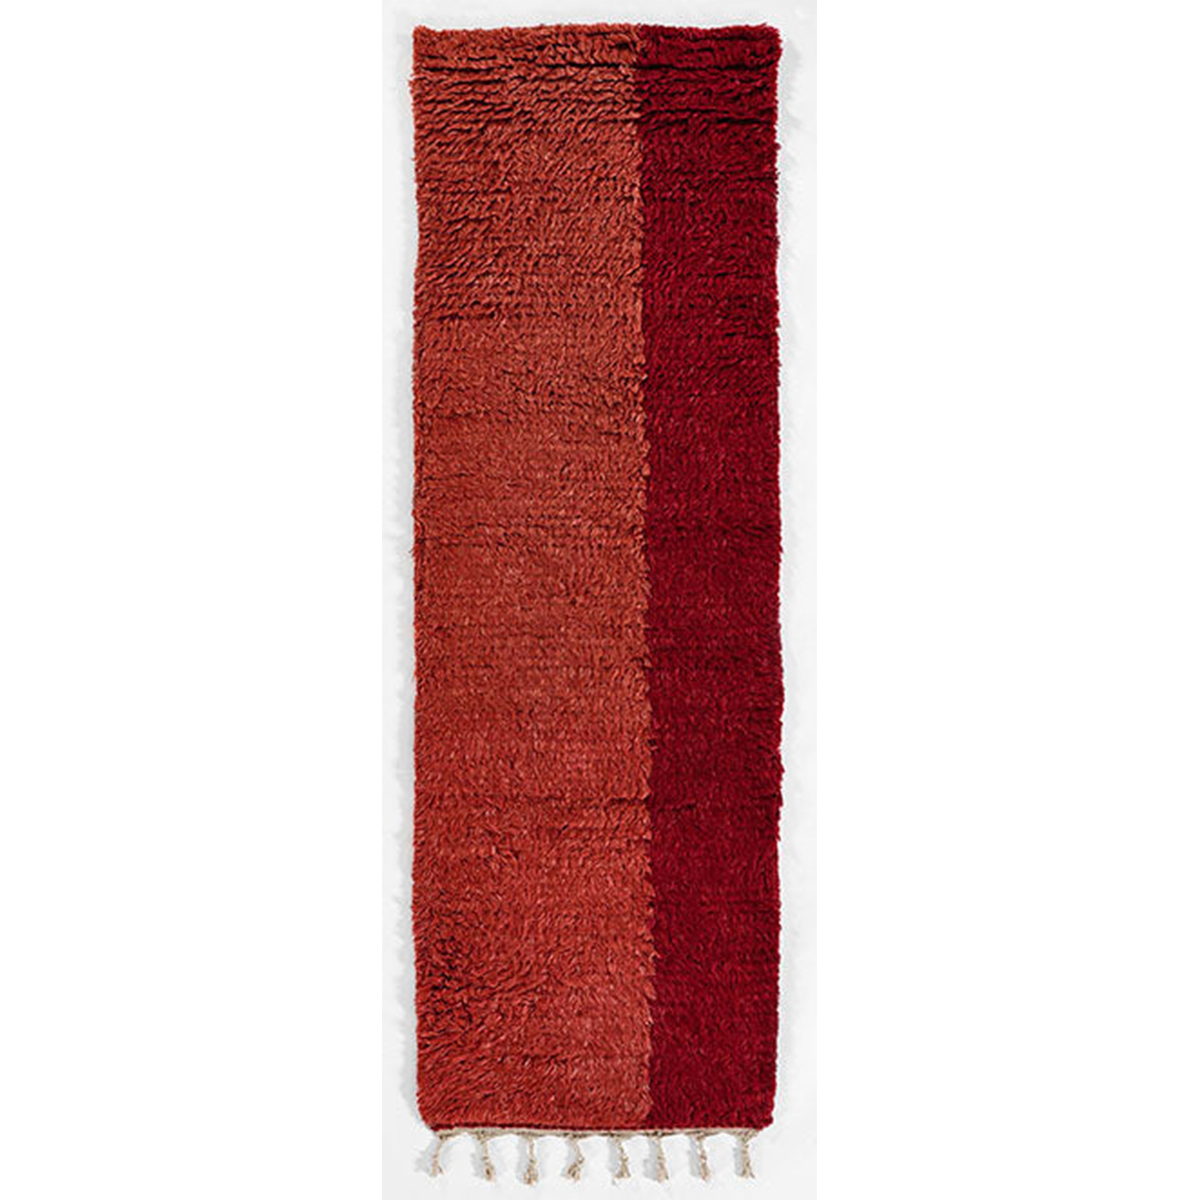 Neo Moroccan-3 Red Rug